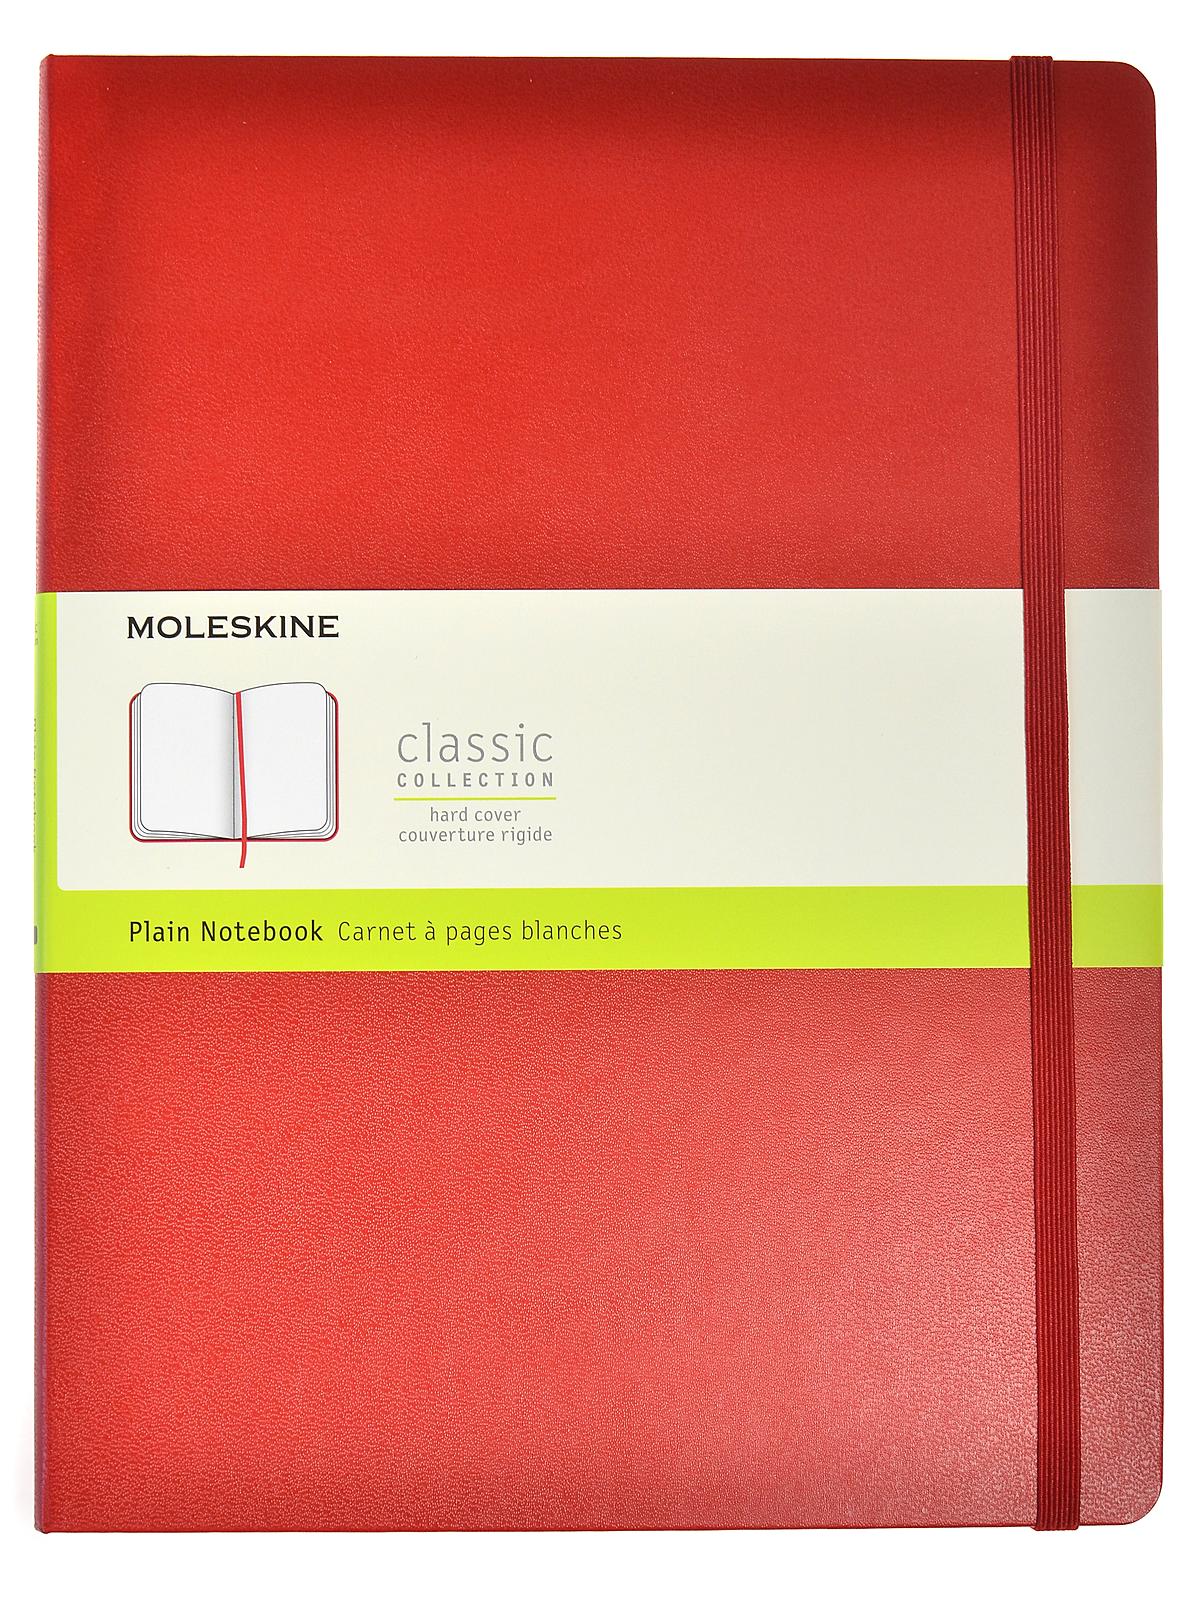 Classic Hard Cover Notebooks Red 7 1 2 In. X 9 3 4 In. 192 Pages, Unlined